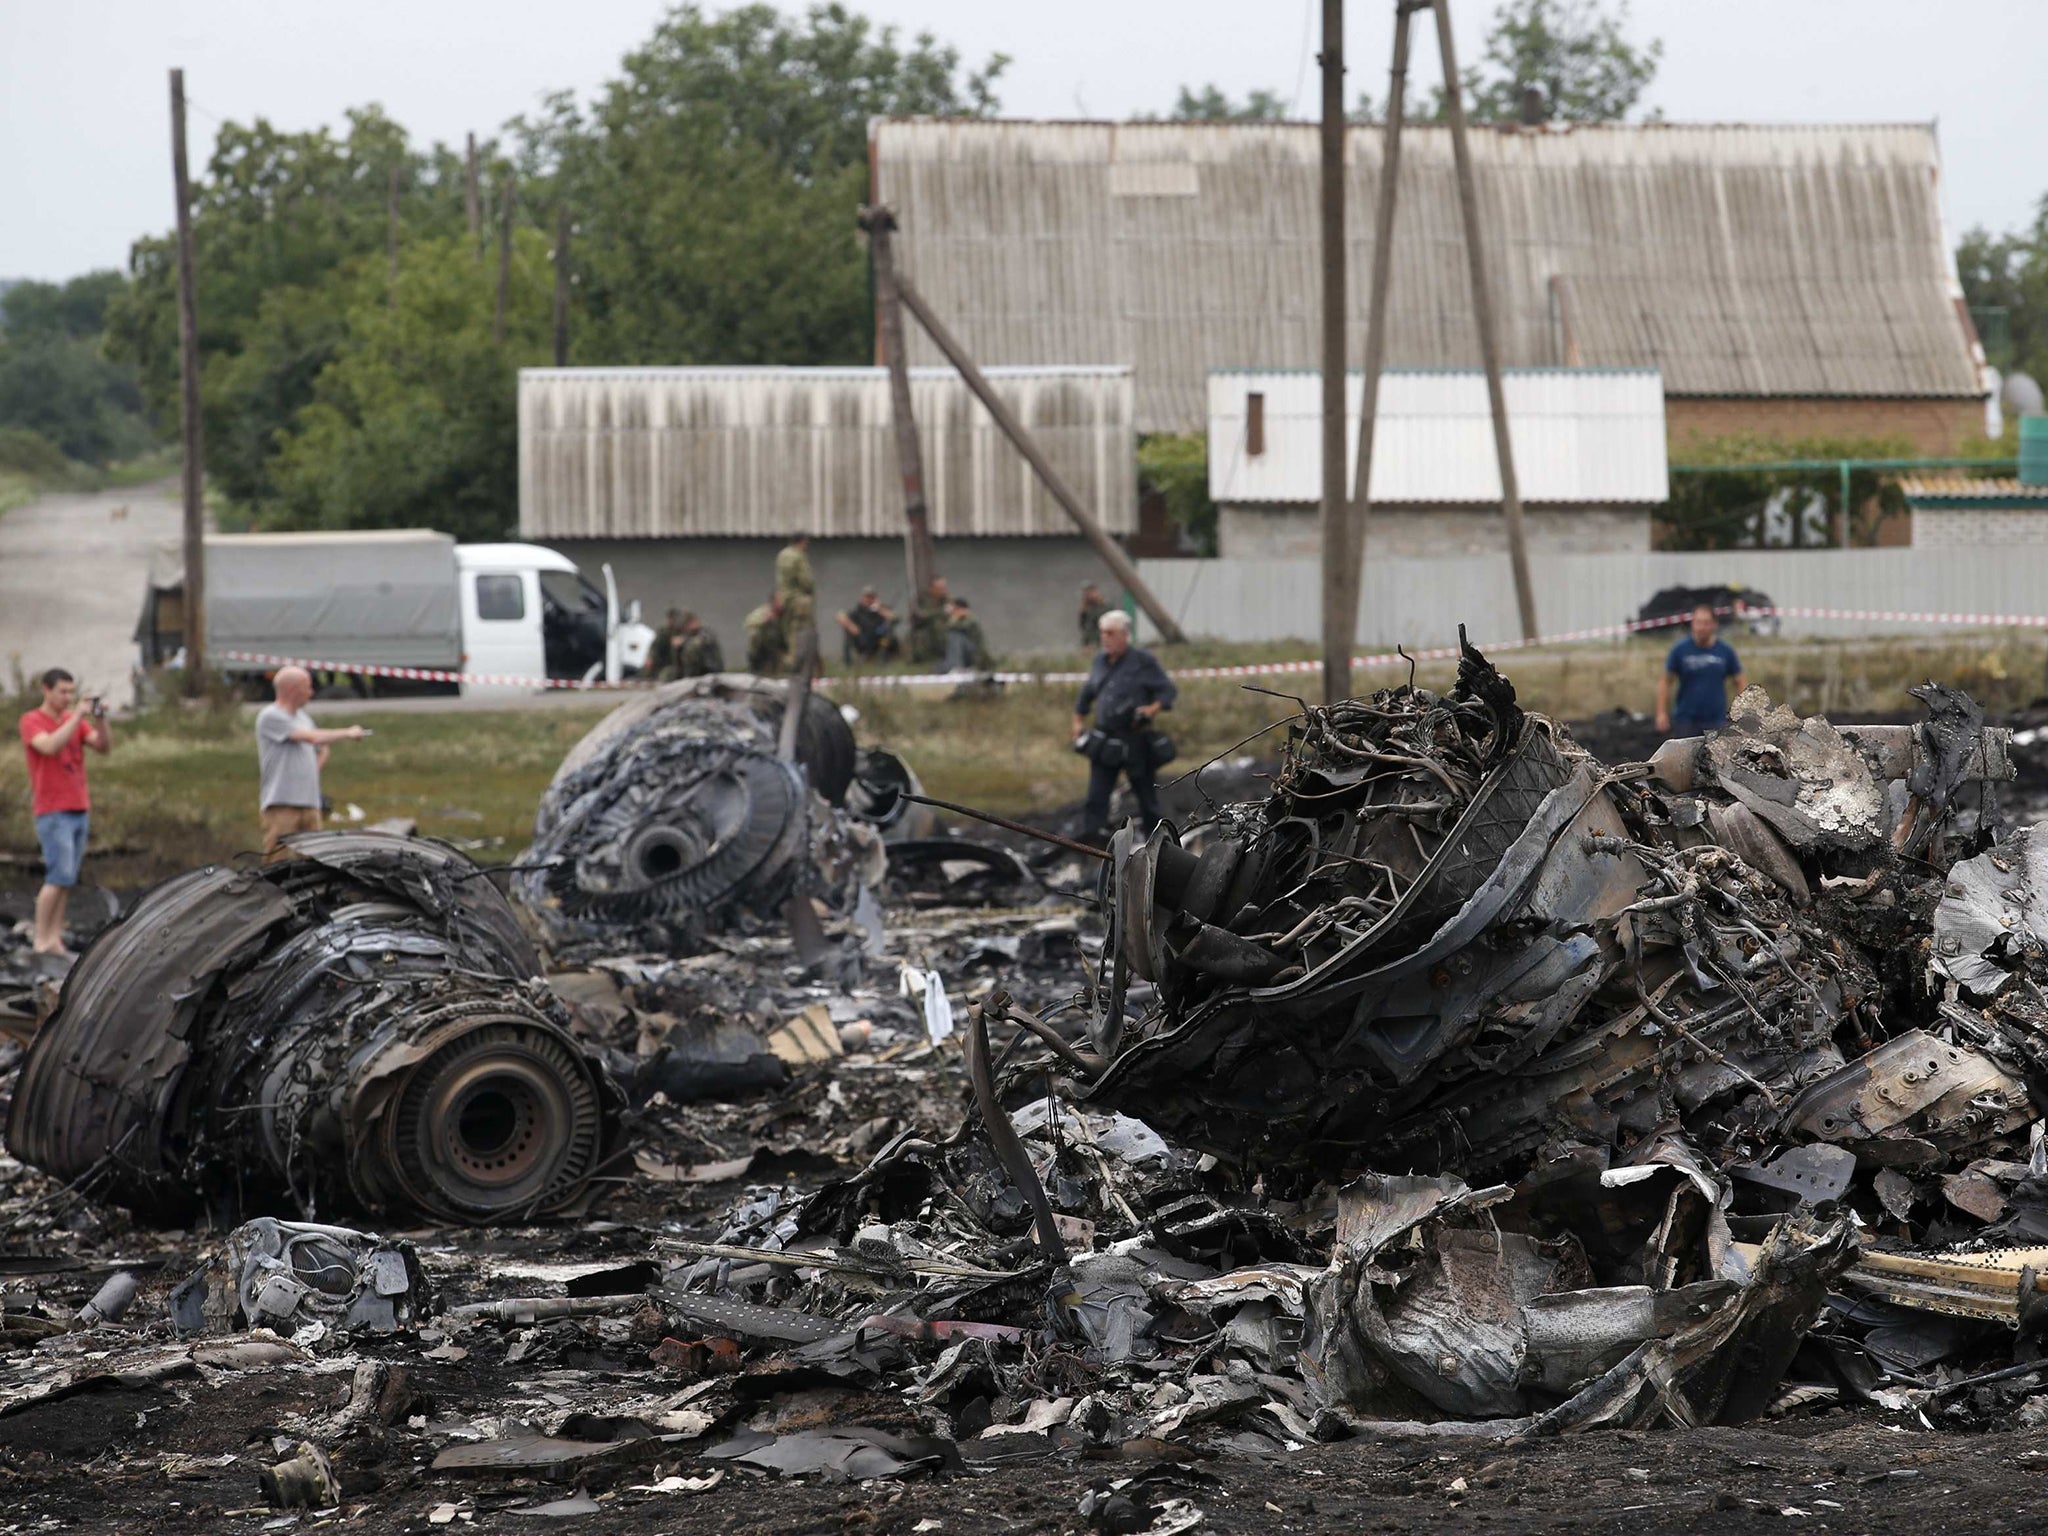 Debris is seen at the site of Malaysia Airlines Boeing 777 plane crash near the settlement of Grabovo, in the Donetsk region